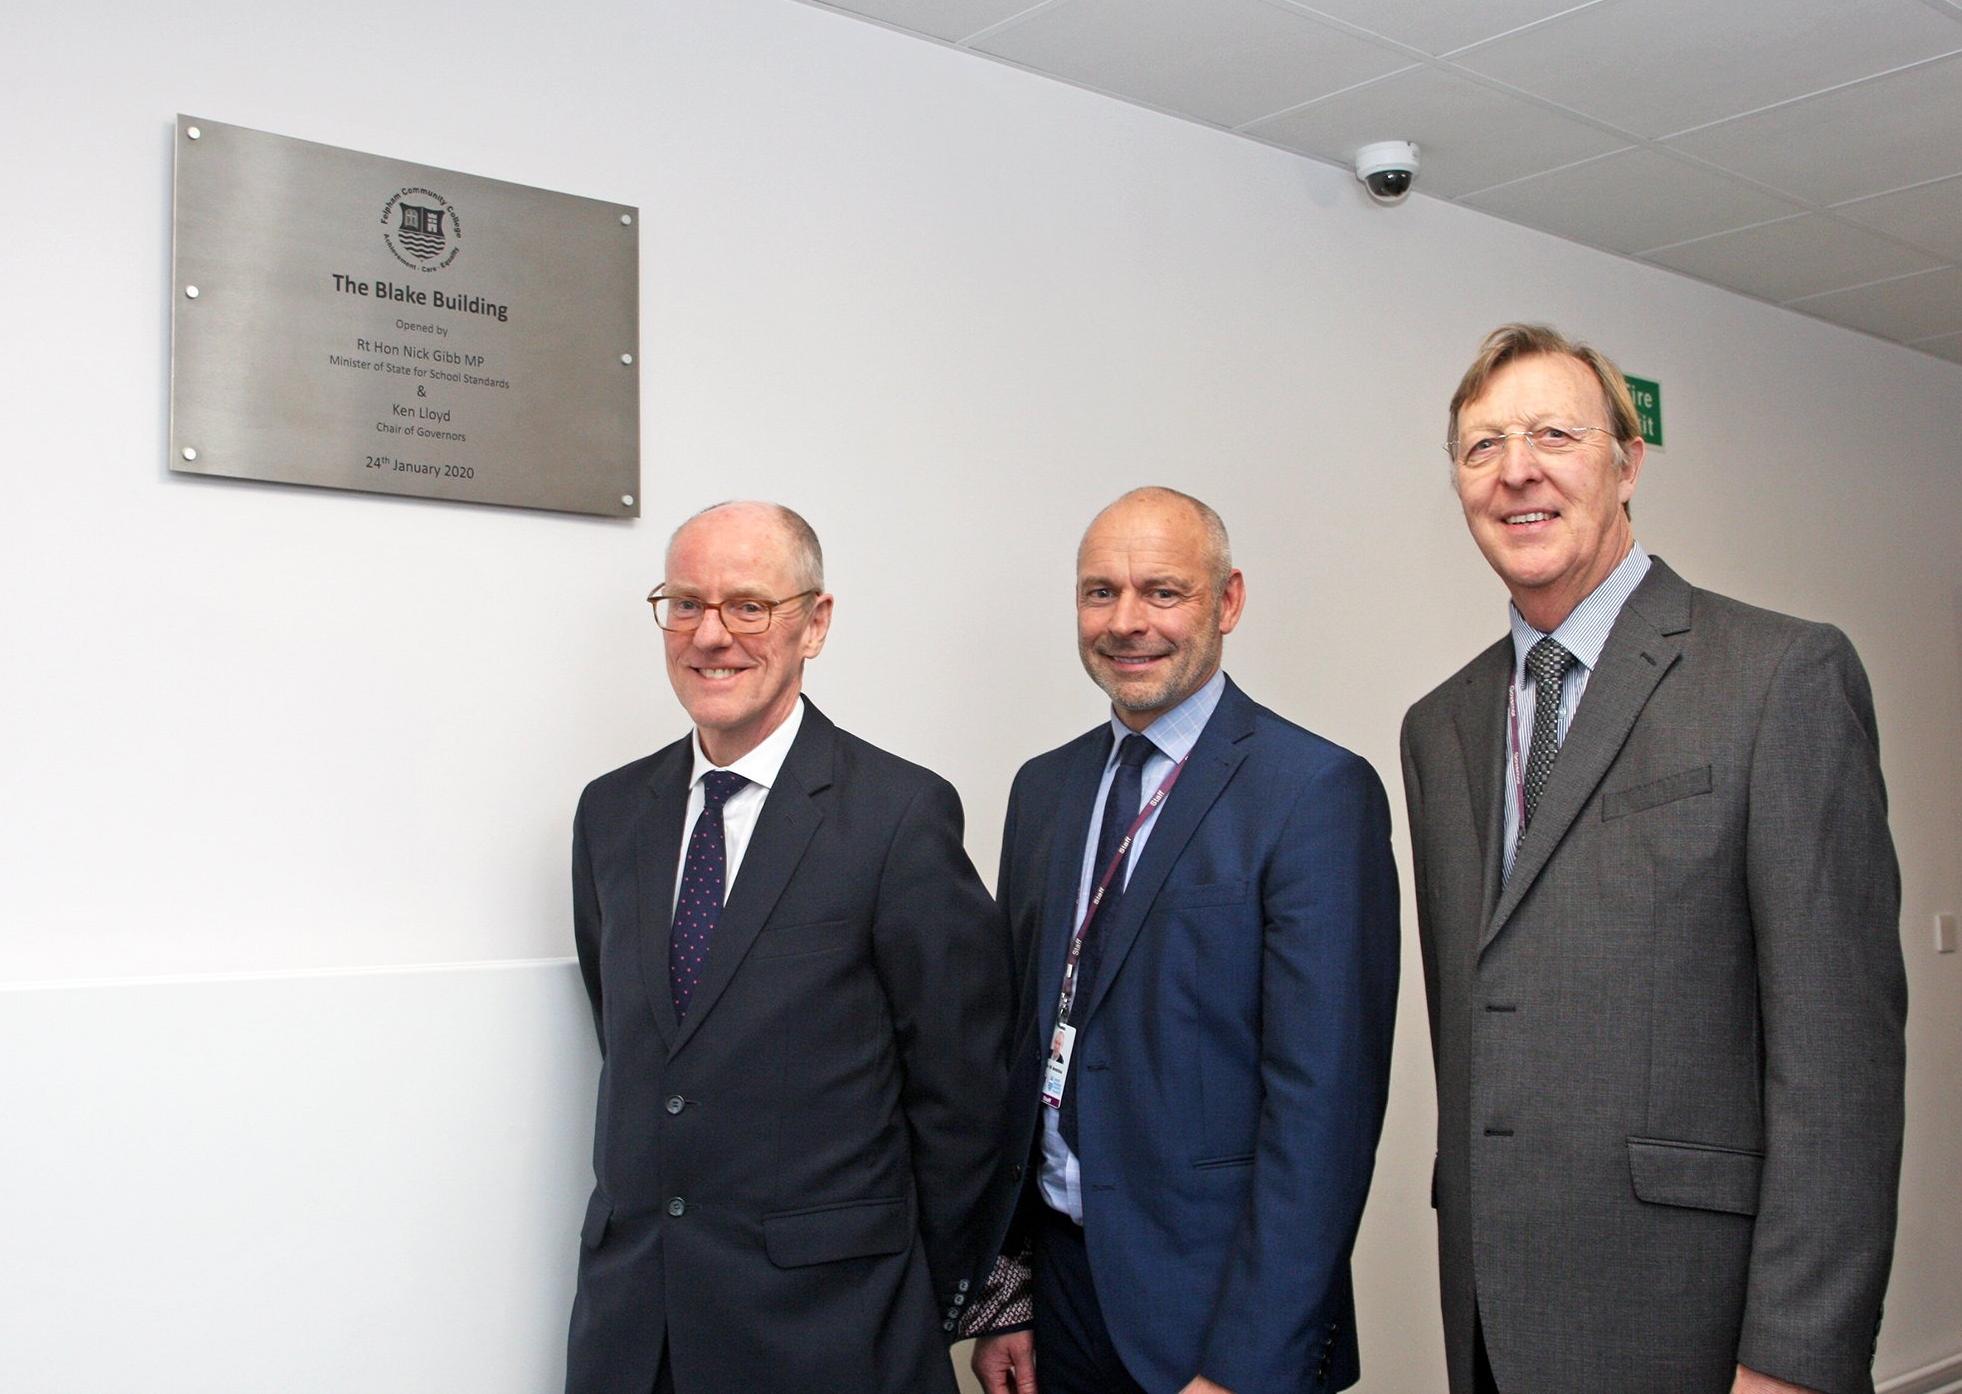 The official opening of the new Blake Building